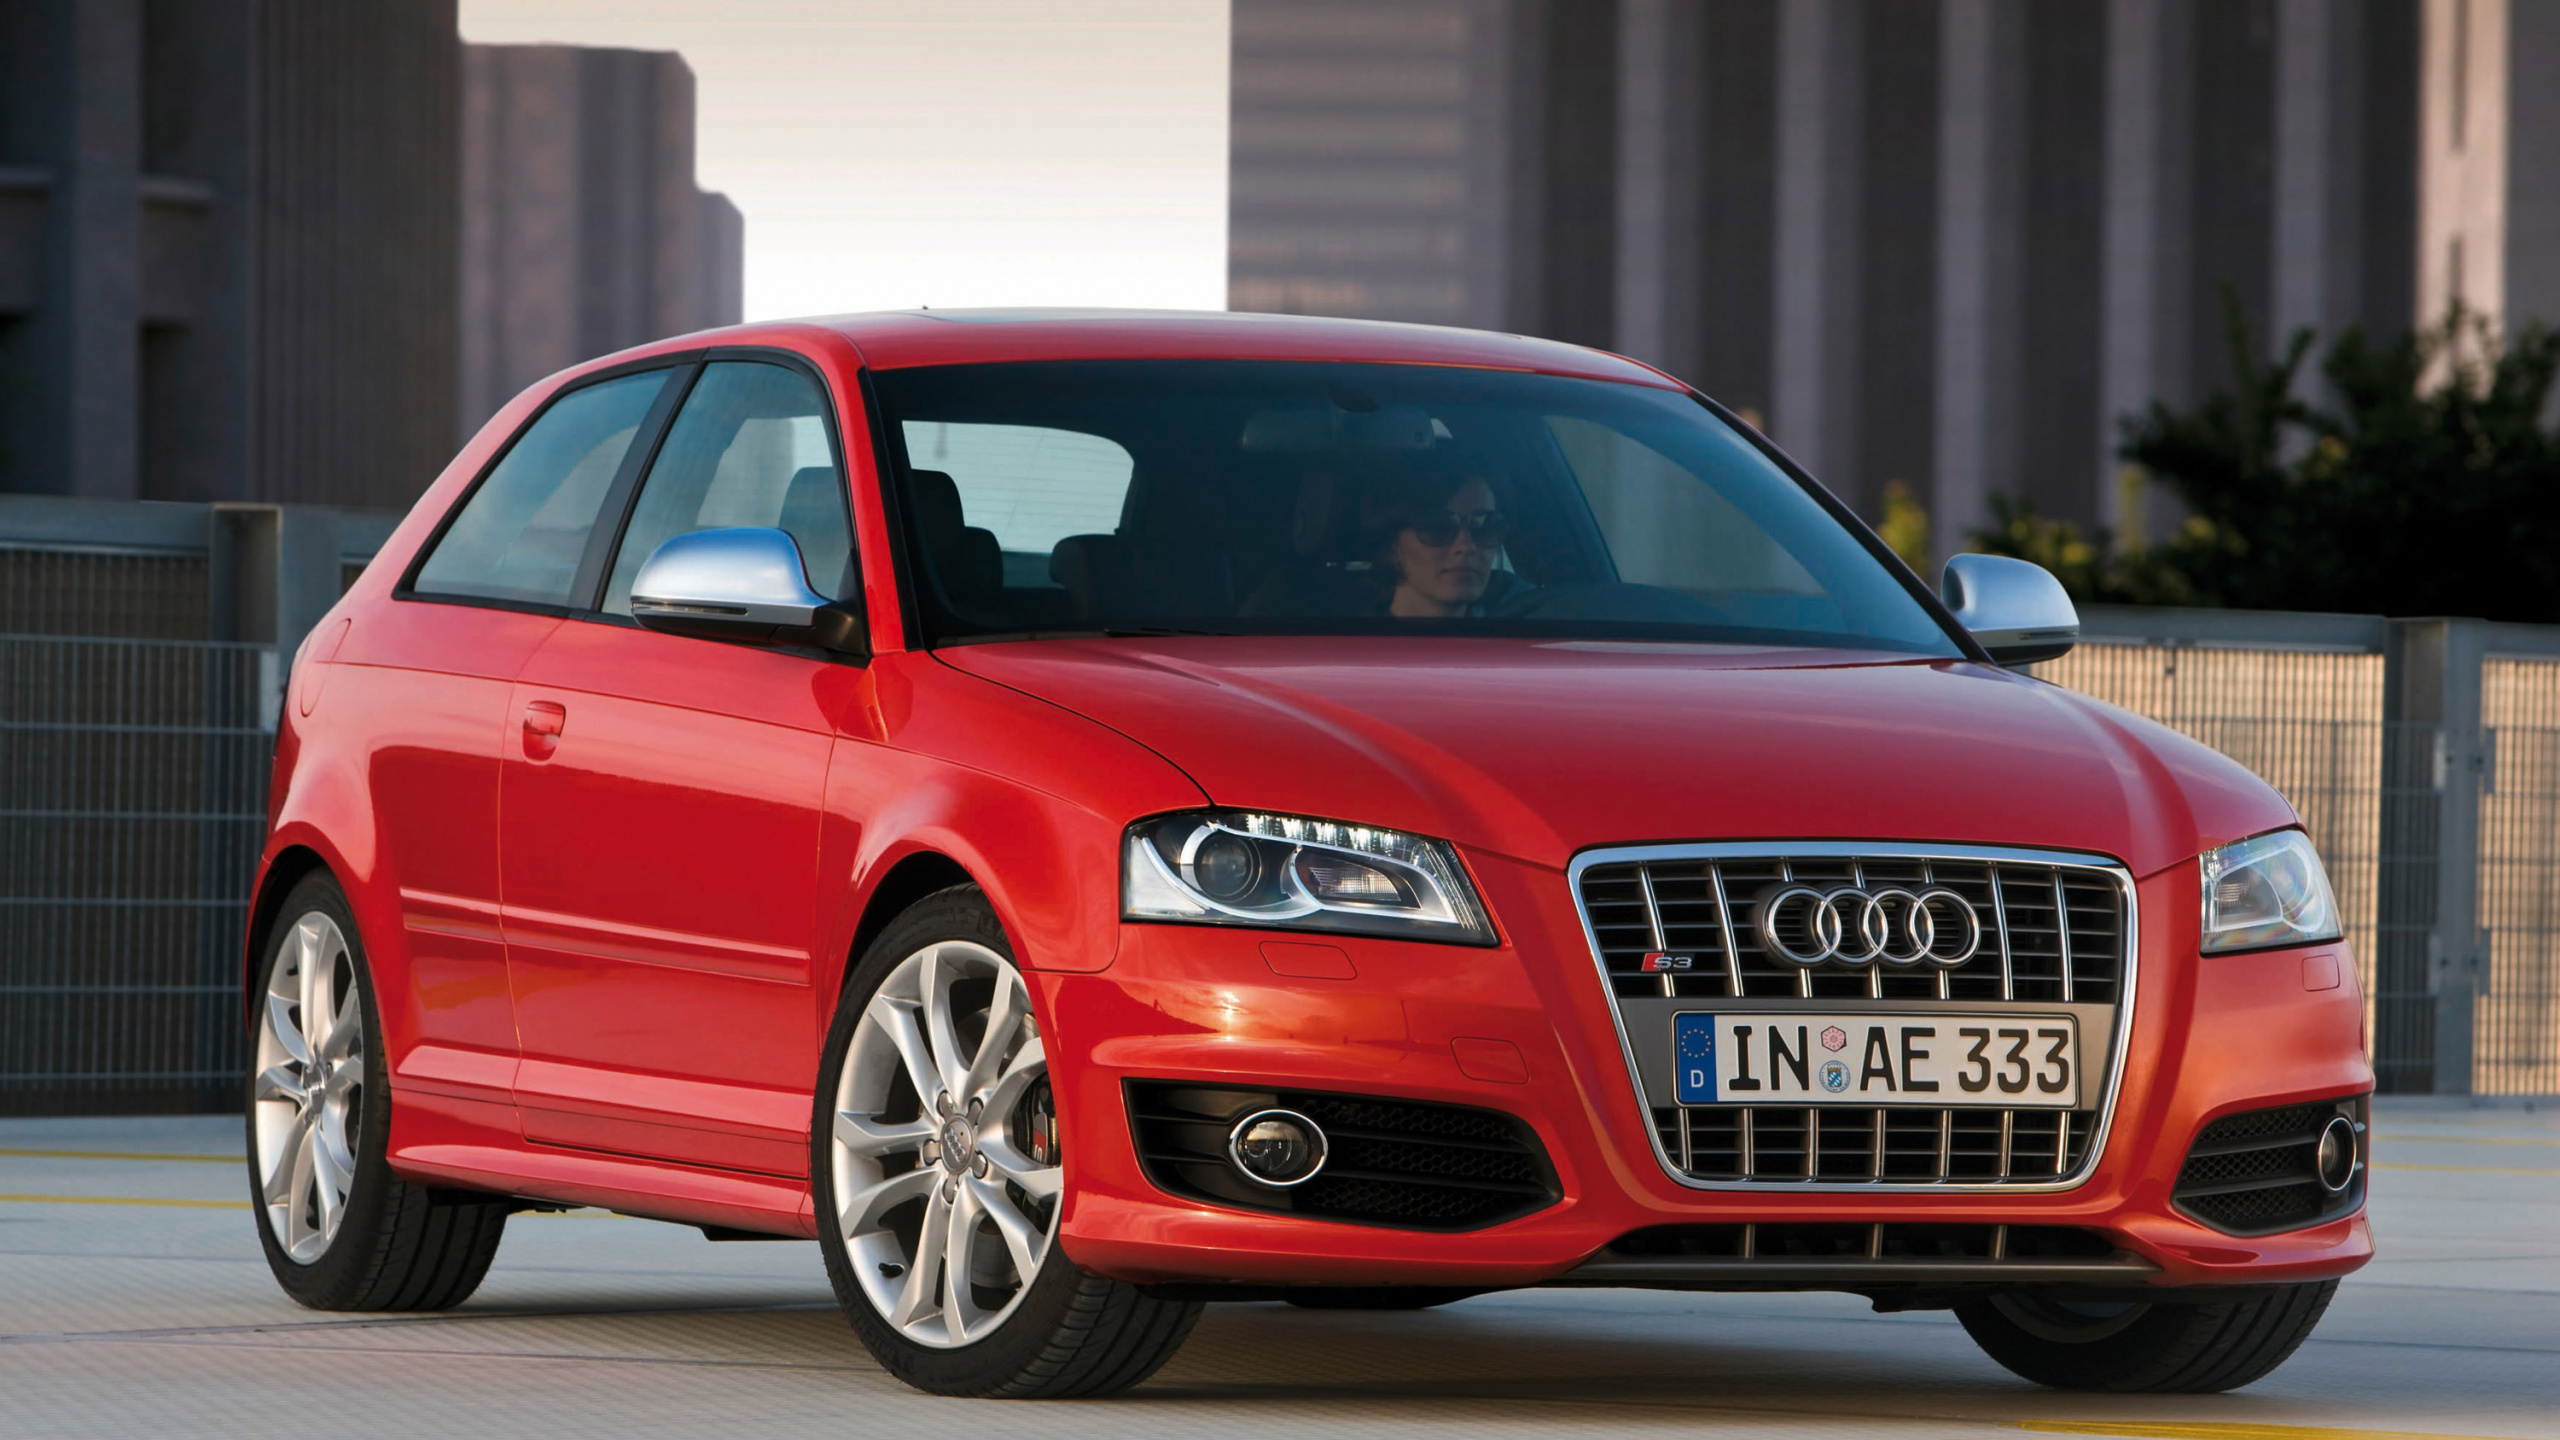 Rot Audi a 4 Limousine. Wallpaper in 2560x1440 Resolution